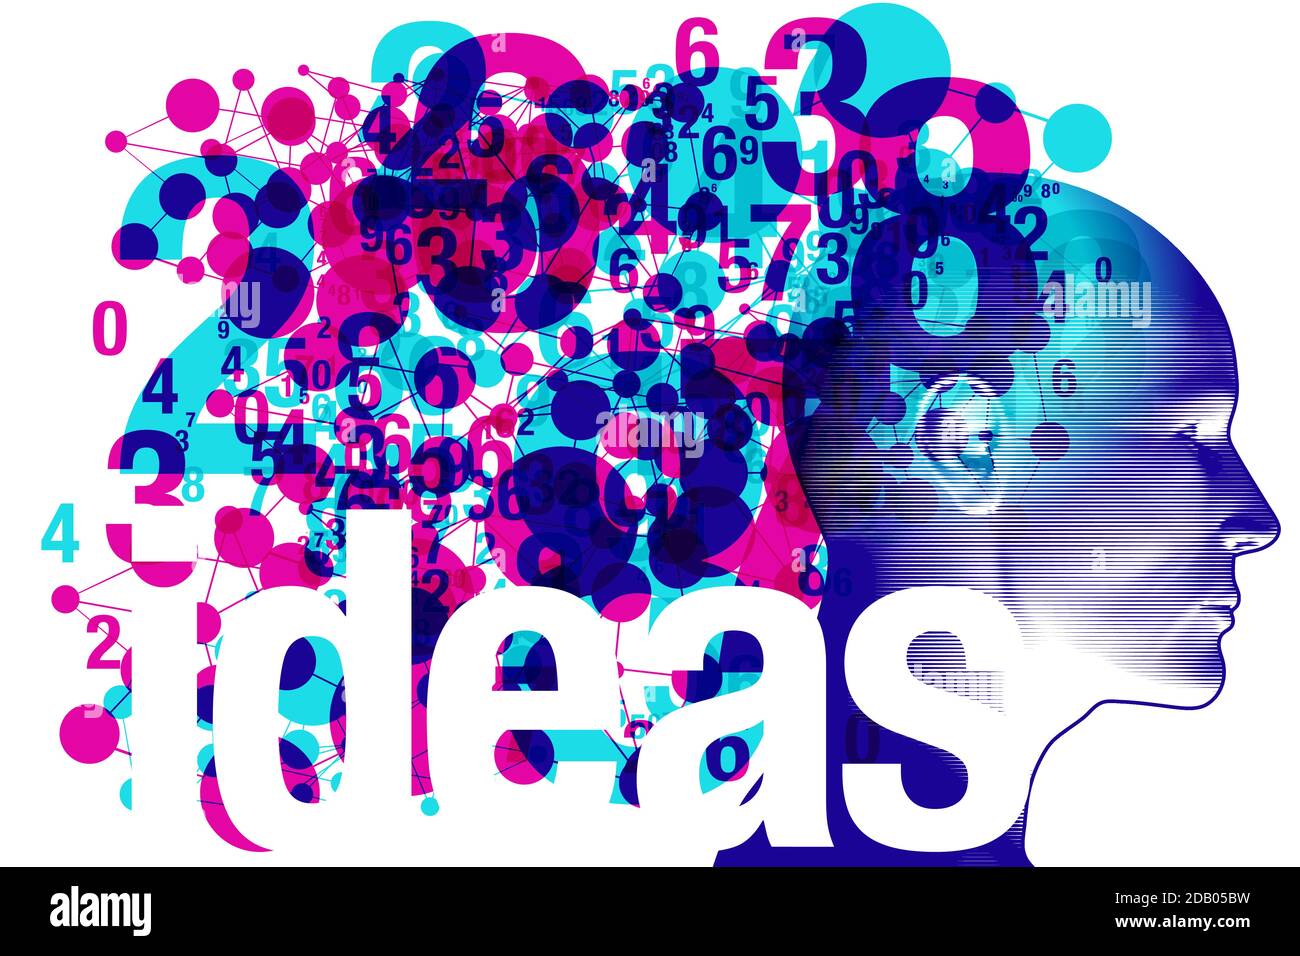 An adult side profile overlaid with various semi-transparent magenta & cyan shapes objects and details. The word “Ideas” is placed across the bottom. Stock Vector